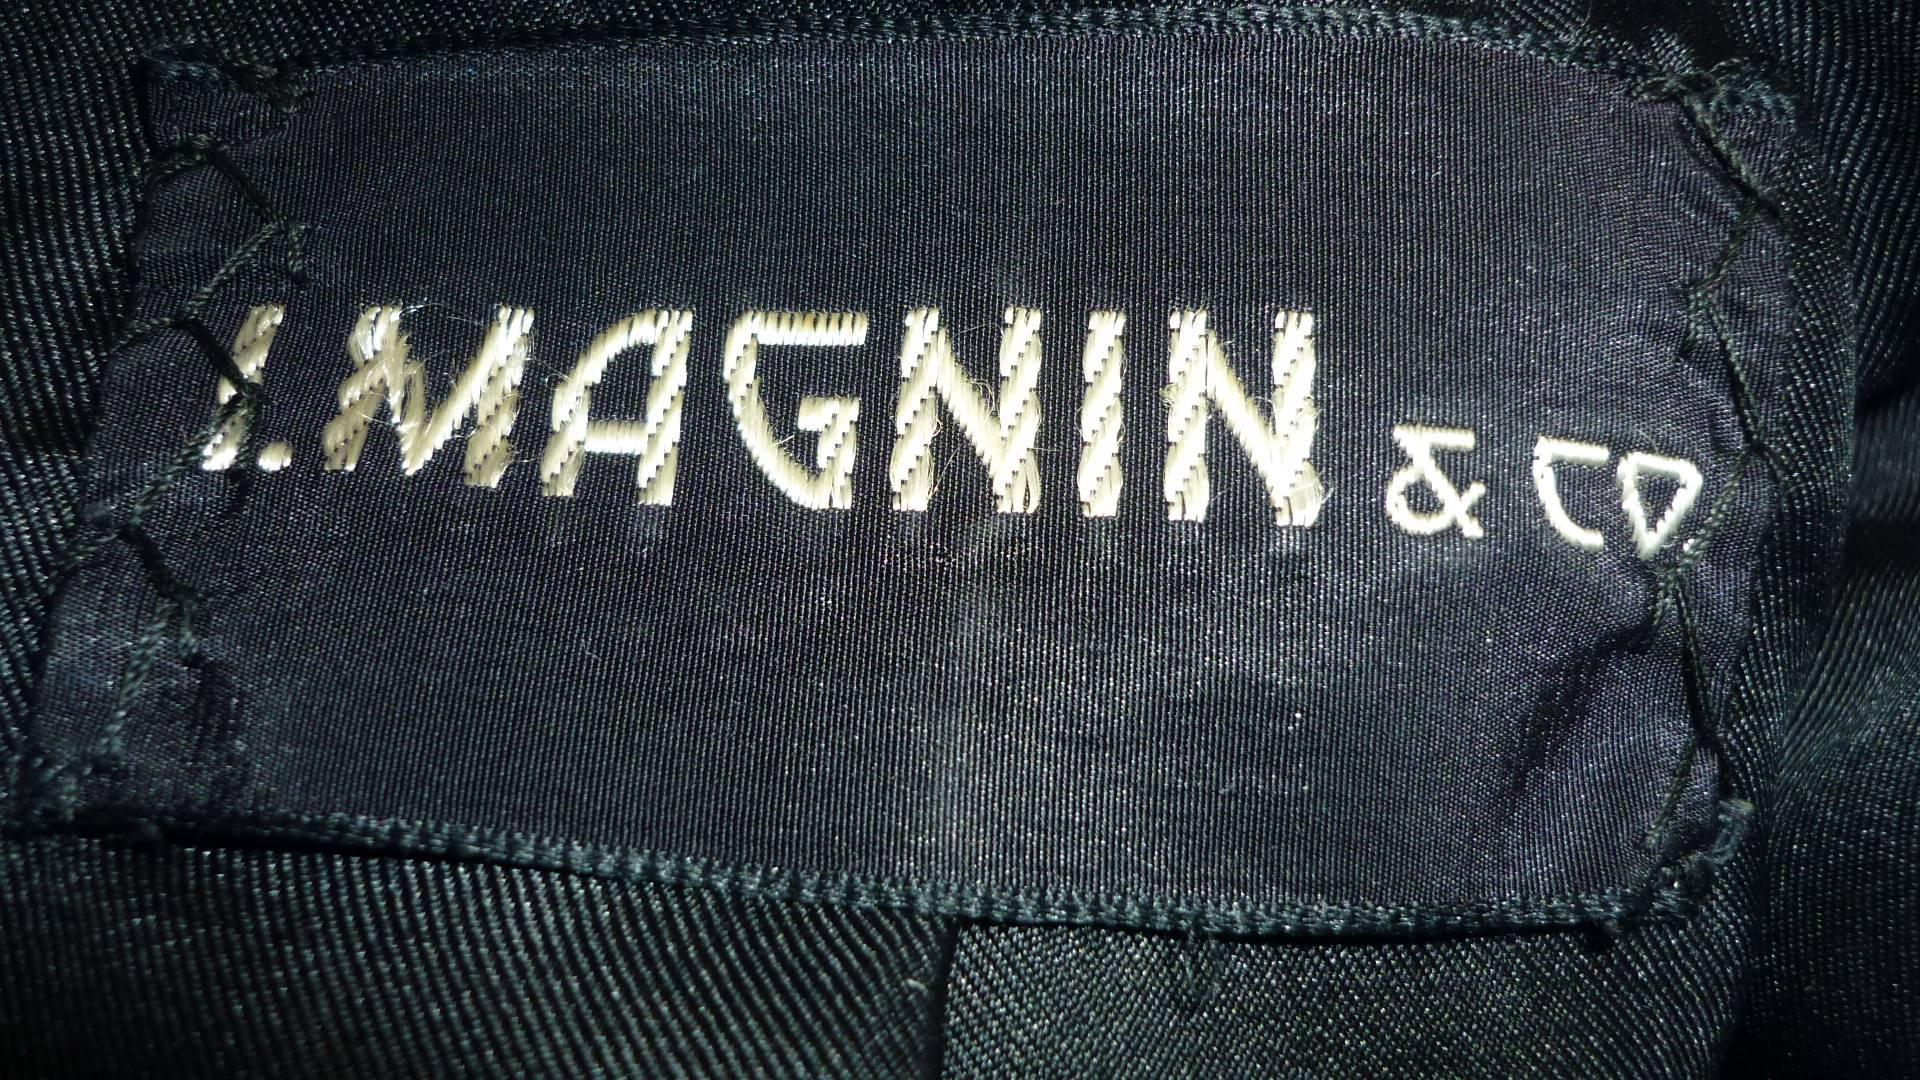 I. Magnin & Co. suit, late 1940s 1